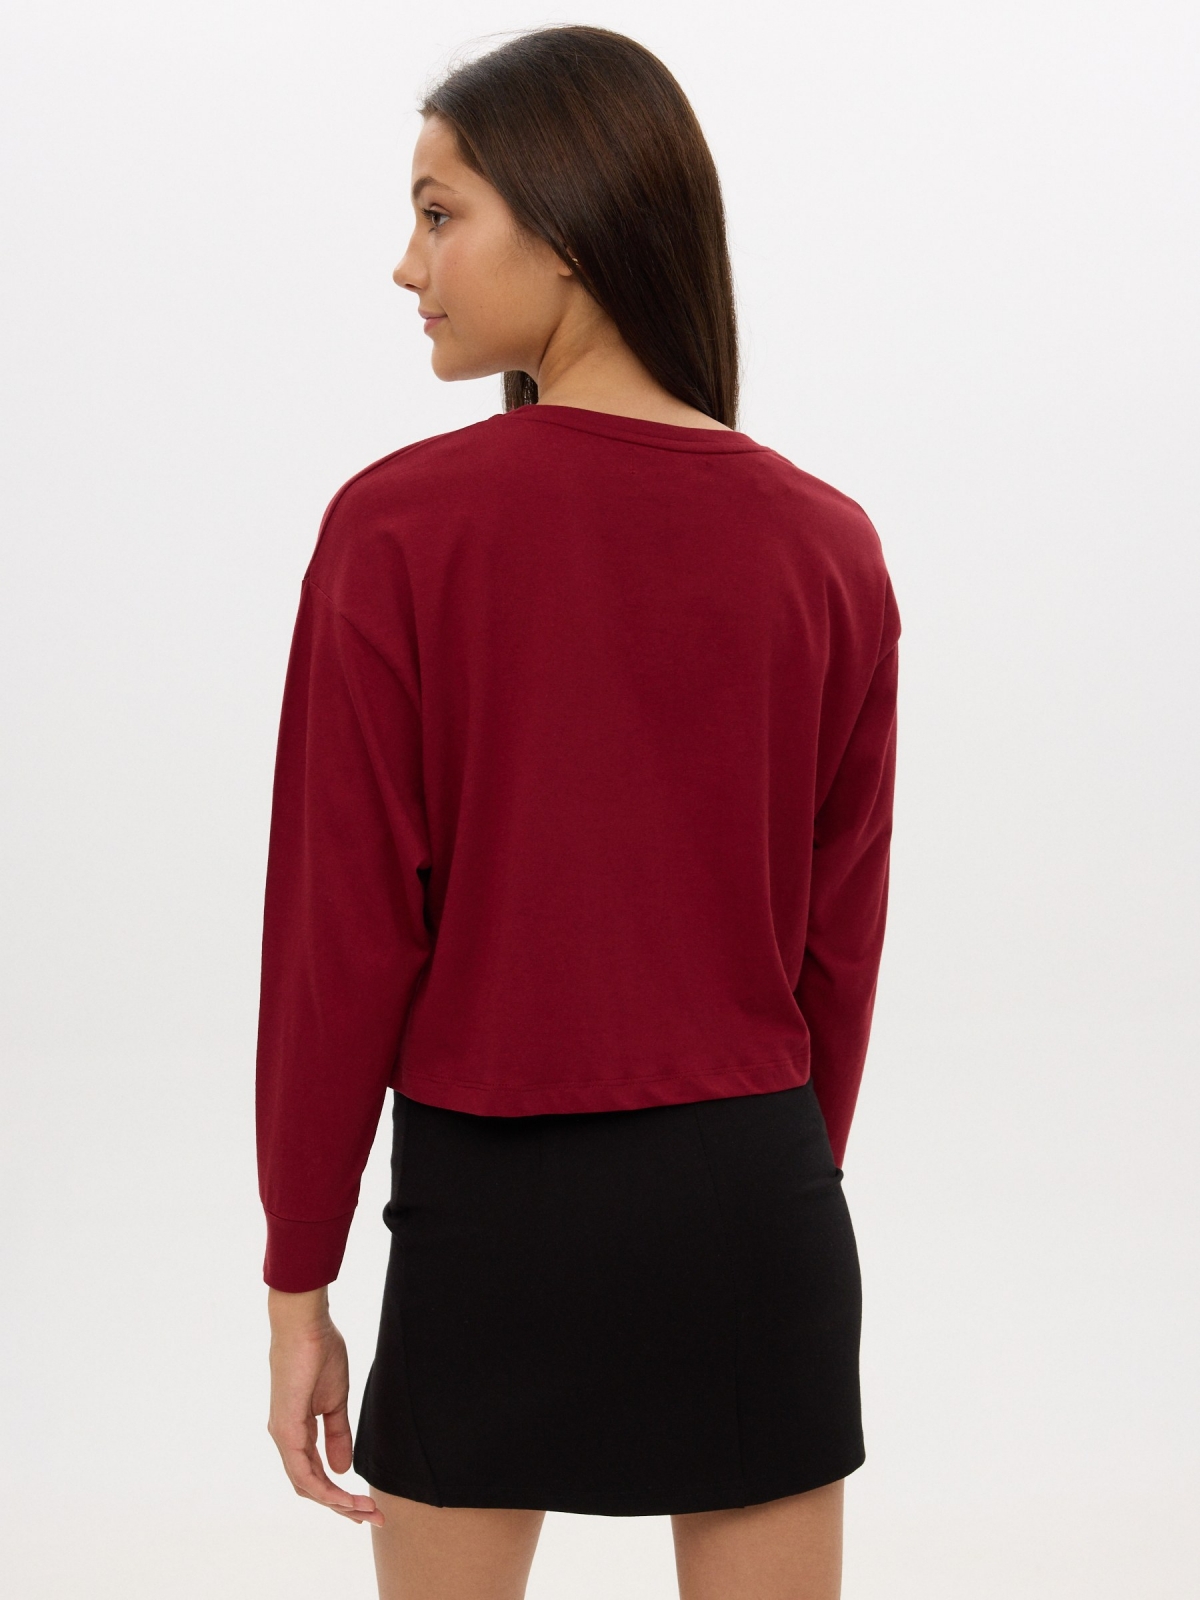 T-shirt with print garnet middle back view